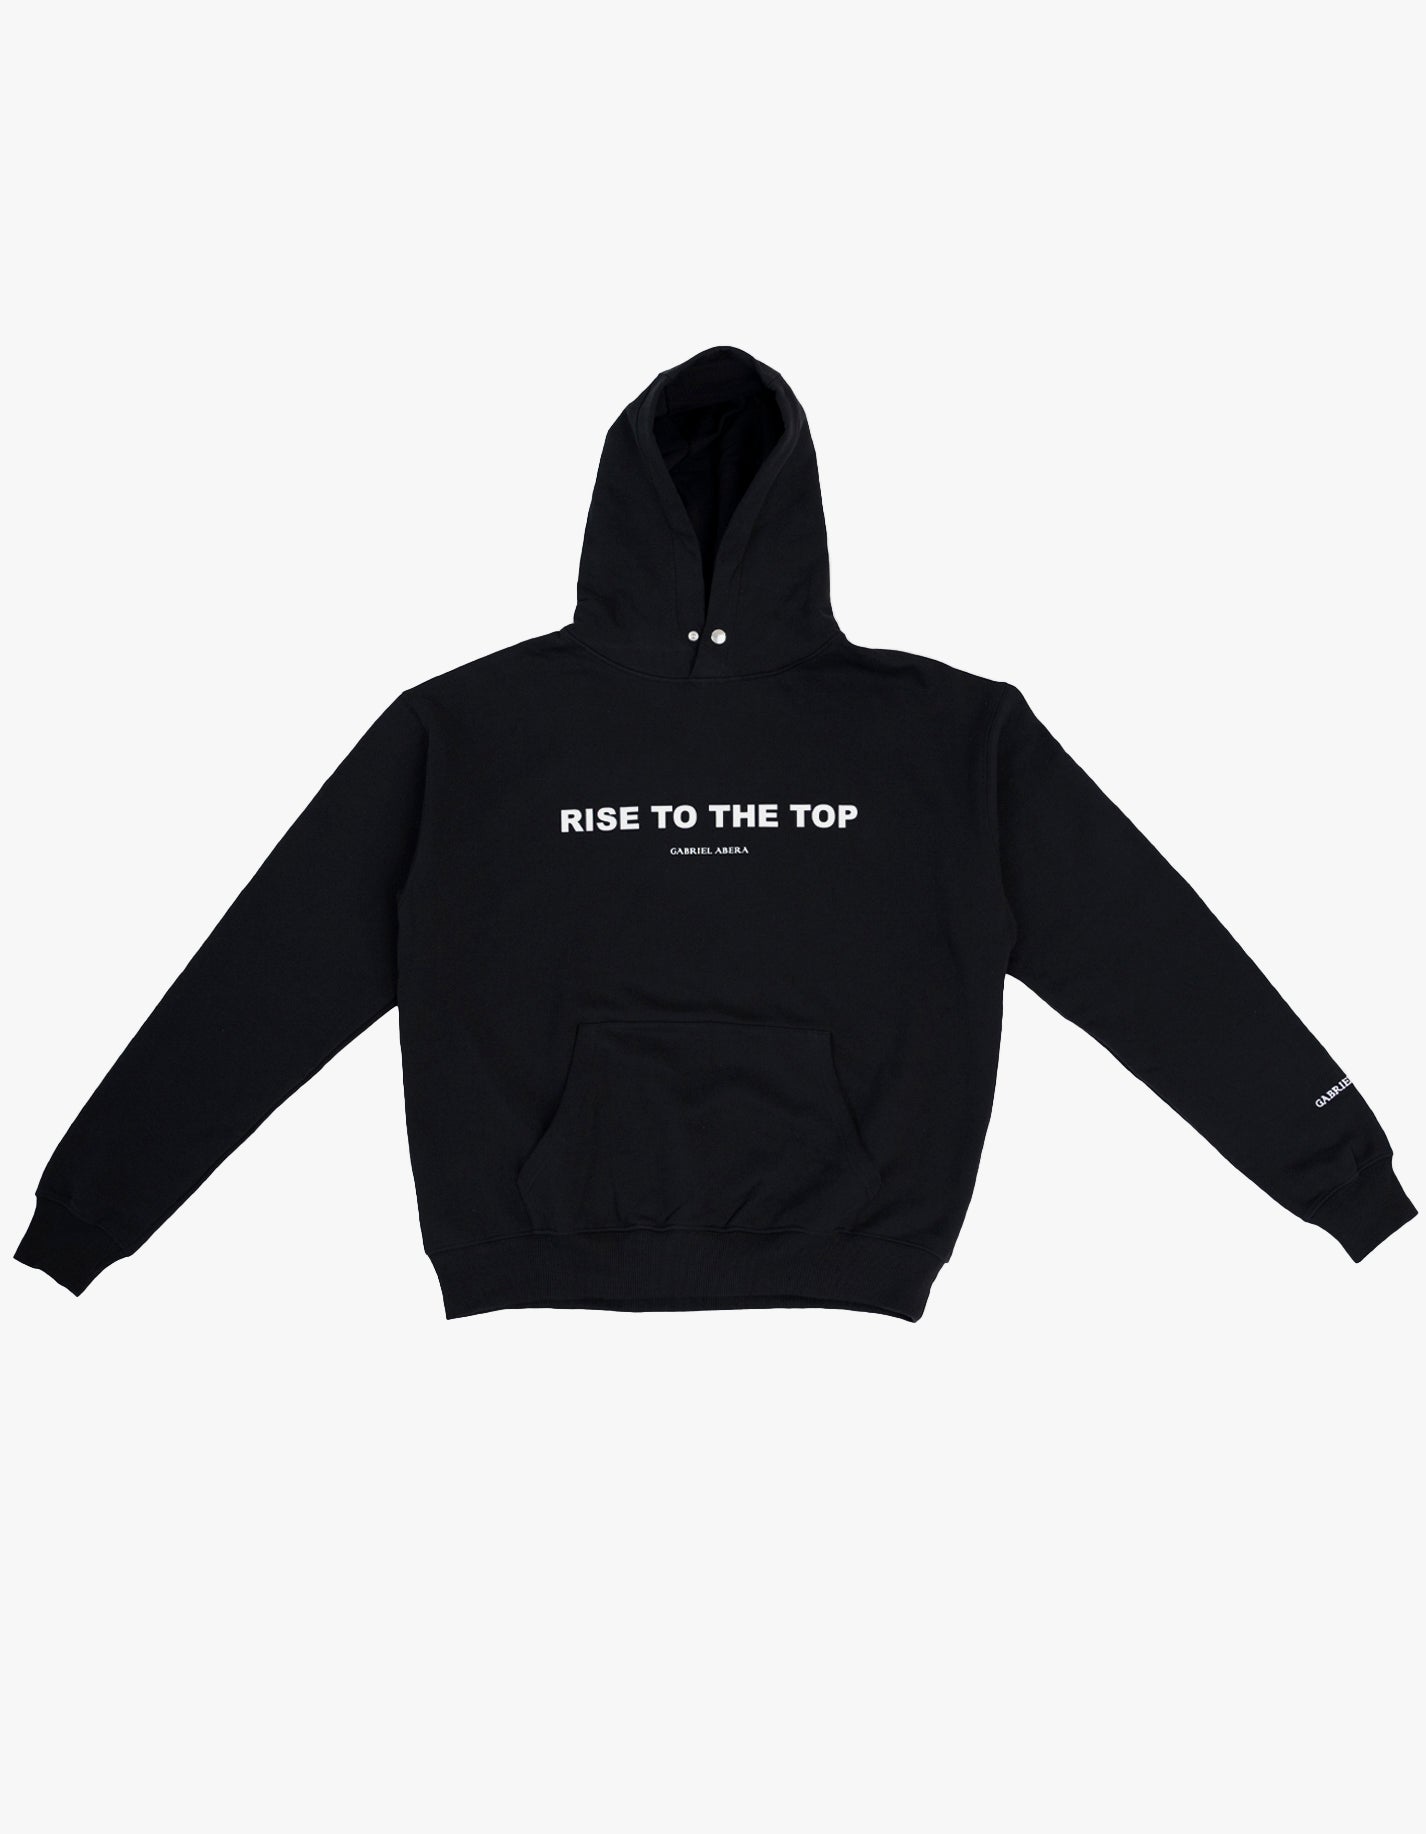 Black oversize hoodie with white rise to the top embroidery